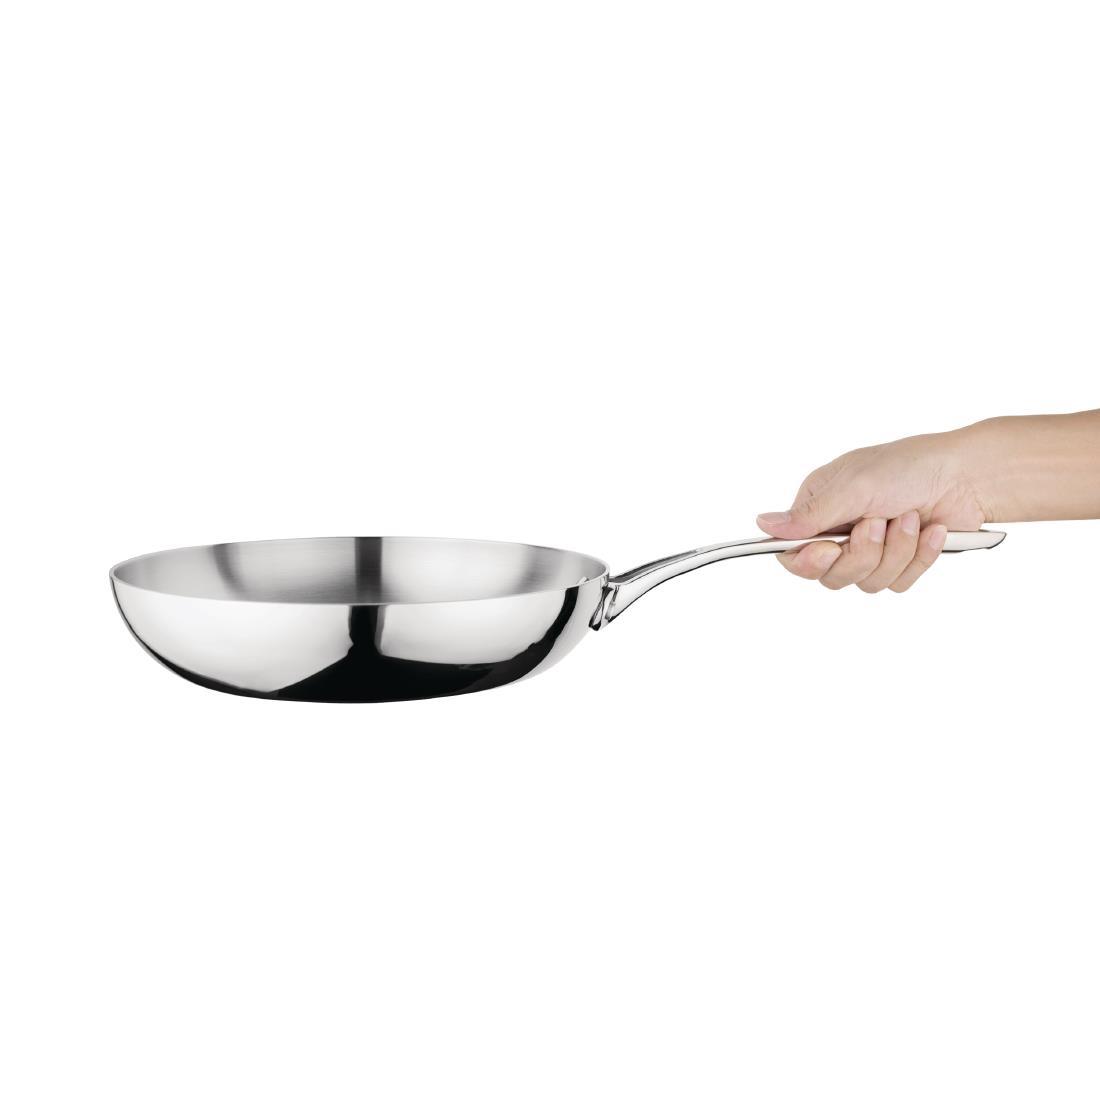 Vogue Tri Wall Induction Frying Pan 240mm - Y320  - 4